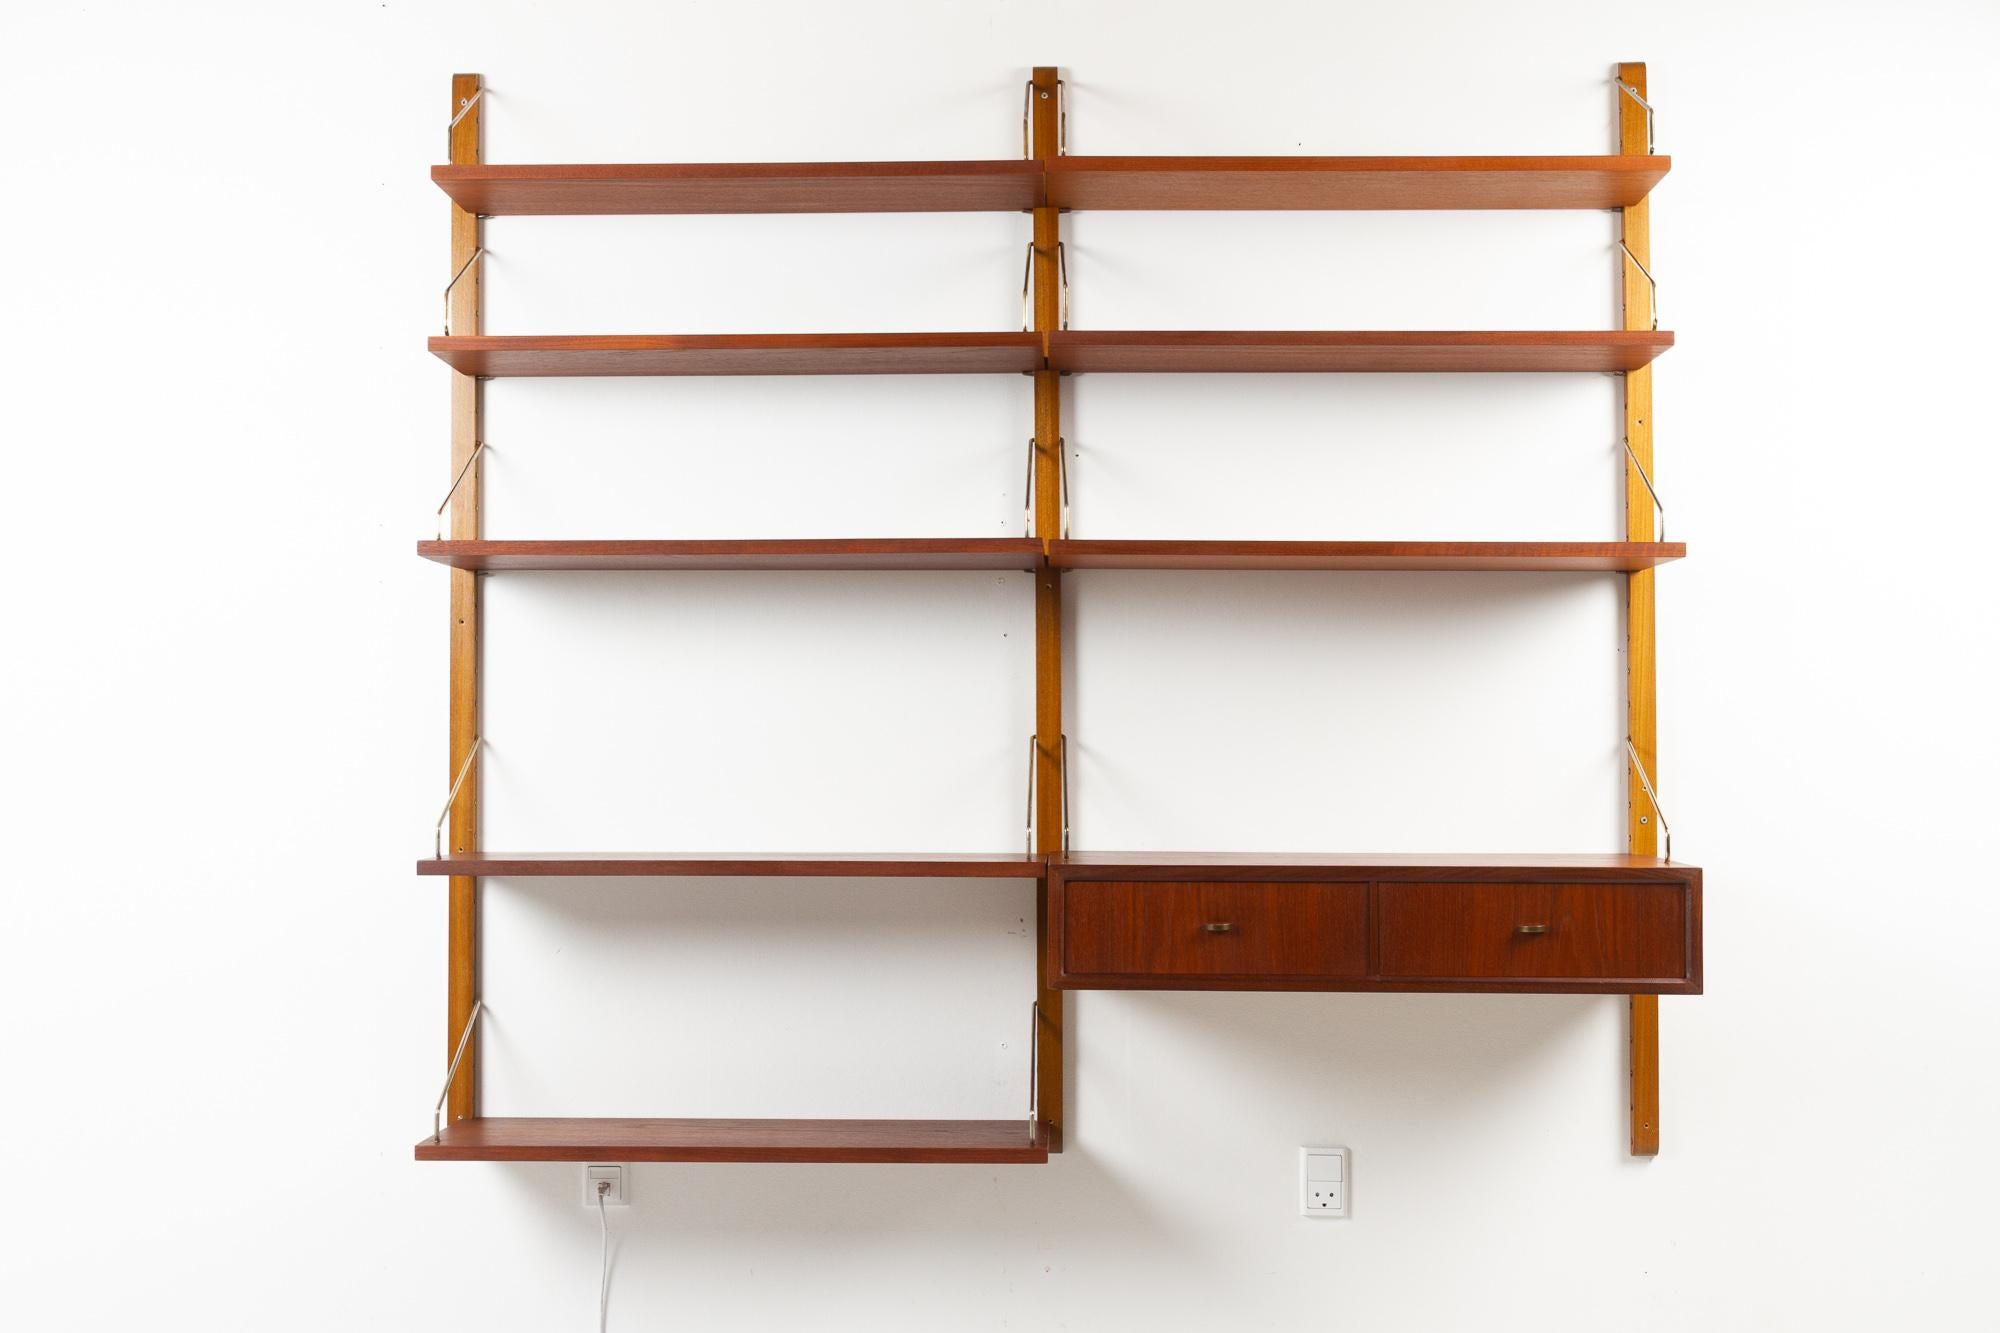 Vintage Danish teak wall unit by Poul Cadovius for Cado, 1950s.

Mid-Century Modern 2 bay shelving system model Royal. This is a original vintage floating bookcase designed in 1948 by Danish architect Poul Cadovius. 
Cadovius had the